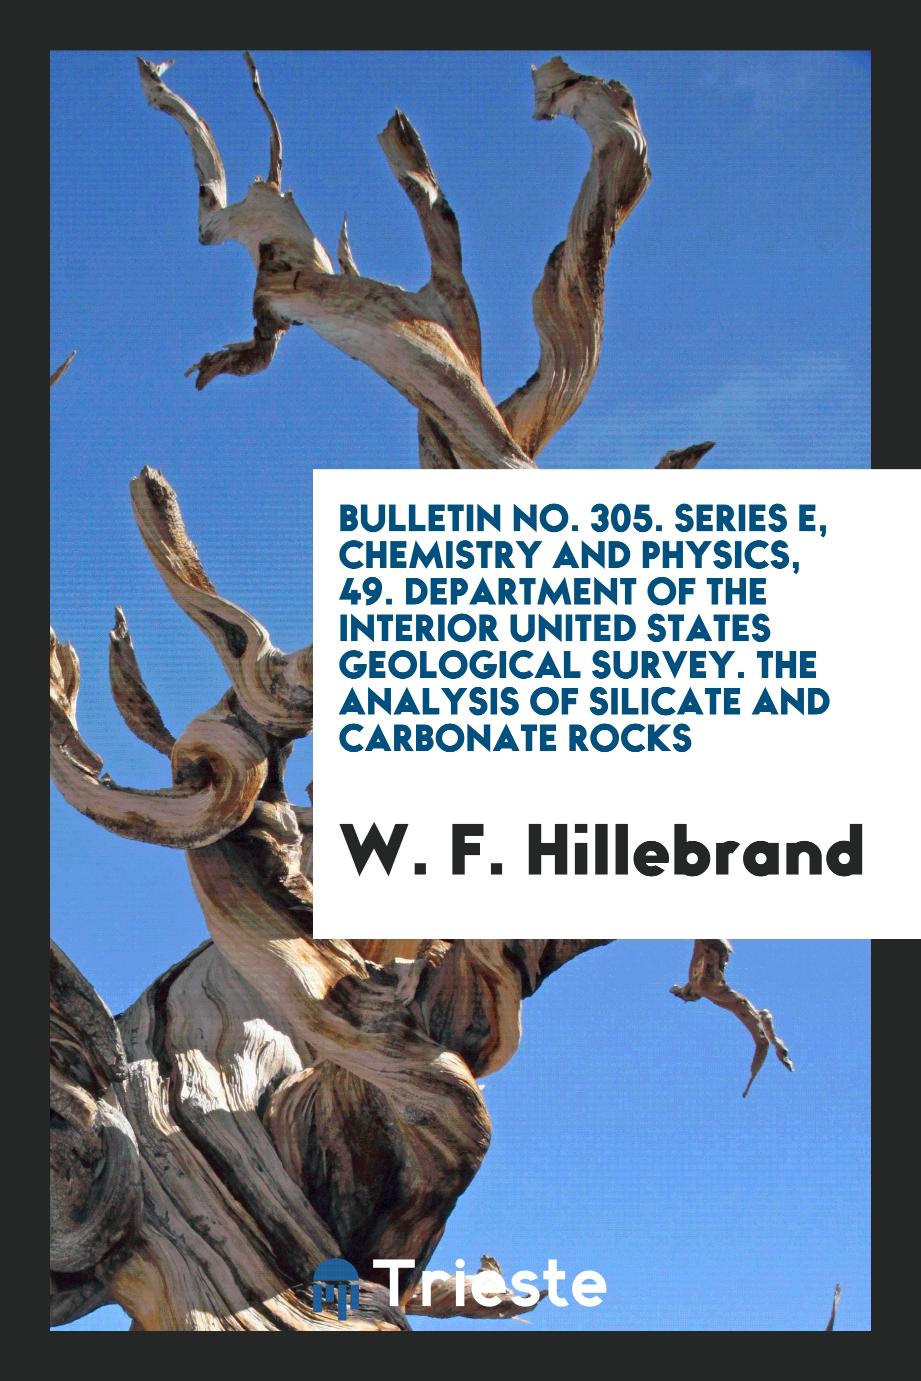 Bulletin No. 305. Series E, Chemistry and Physics, 49. Department of the Interior United States Geological Survey. The Analysis of Silicate and Carbonate Rocks